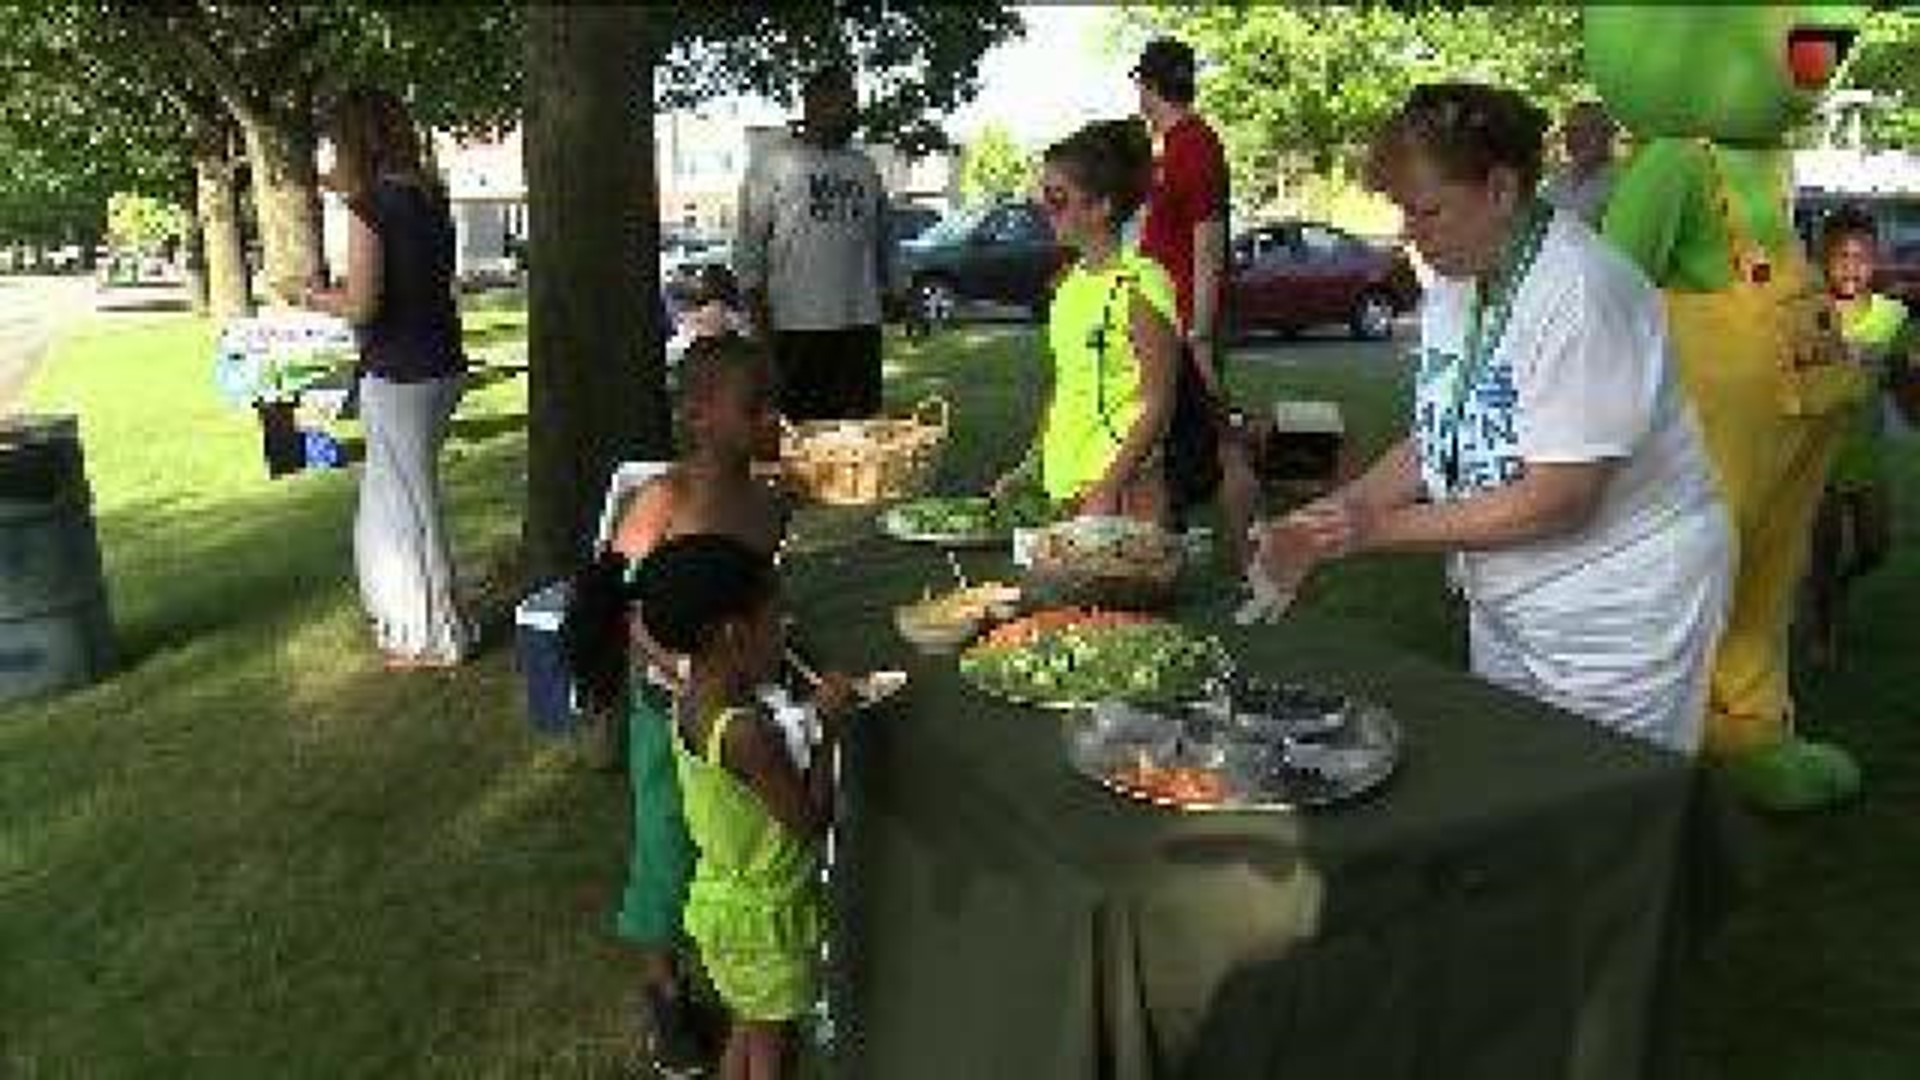 'Food-n-Fun at the Park' Aims to Keep Kids Healthy